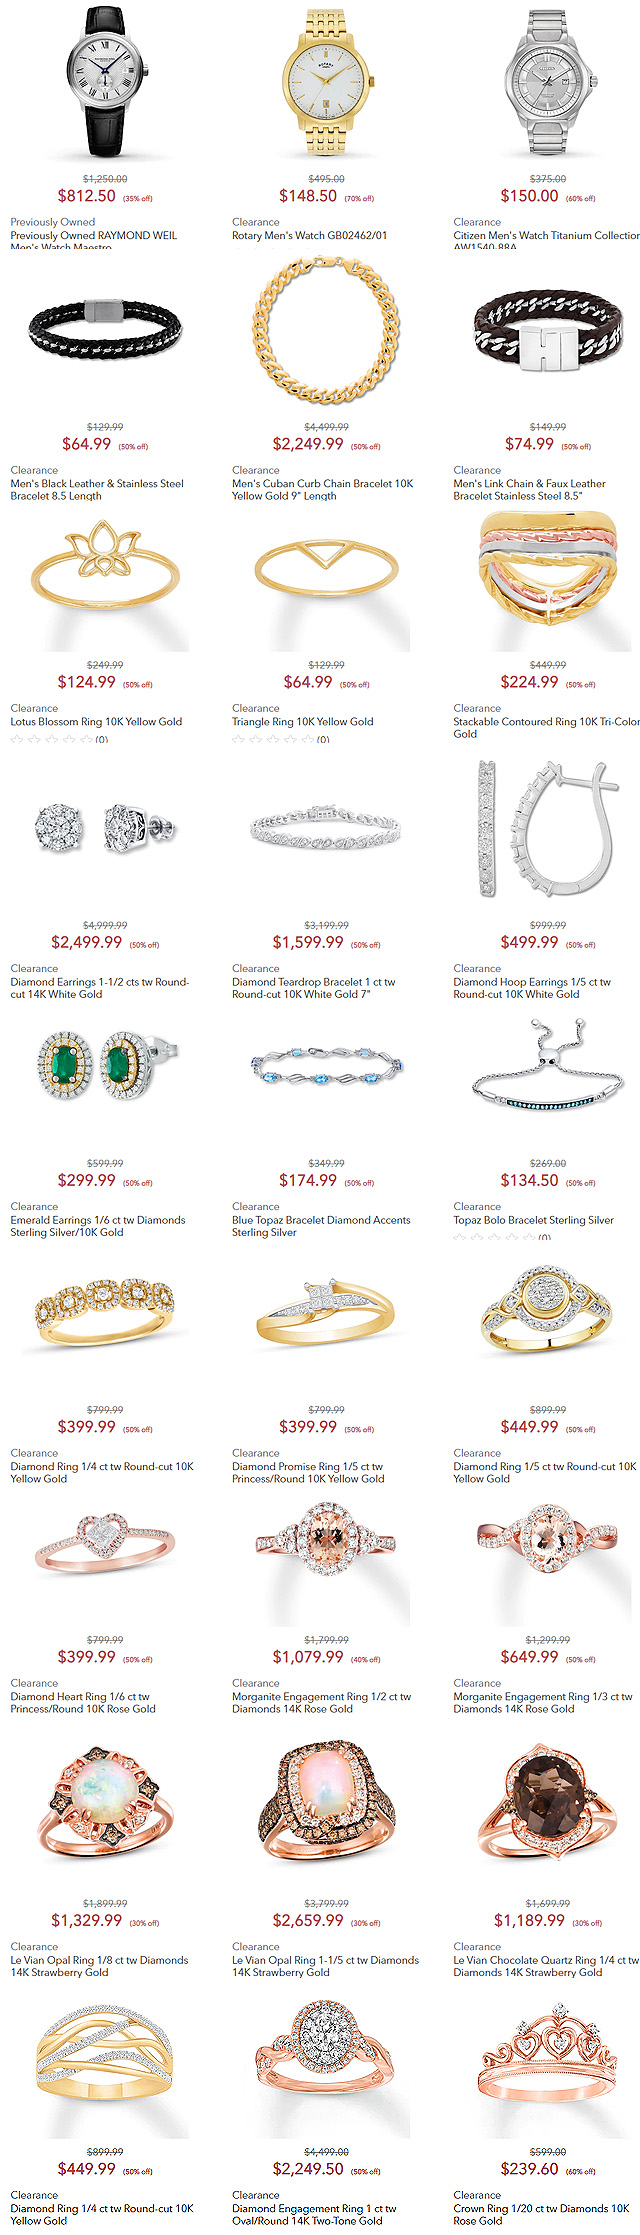 Clearance At Kay Jewelers